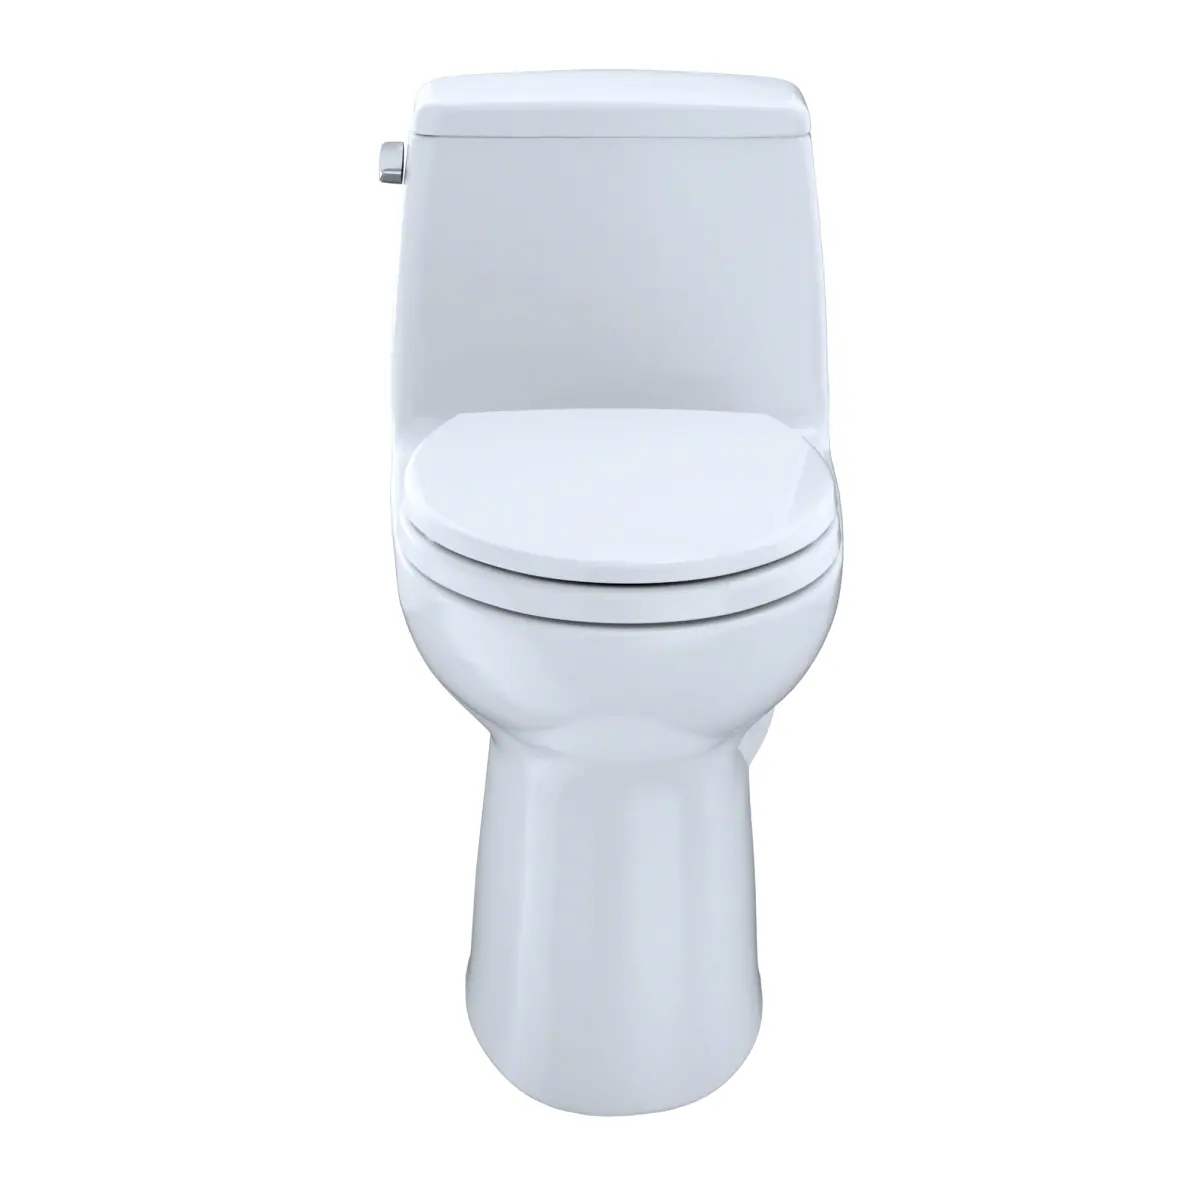 Toto MS854114#12 - Ultimate One-Piece Elongated 1.6 GPF Toilet, Sedona Beige